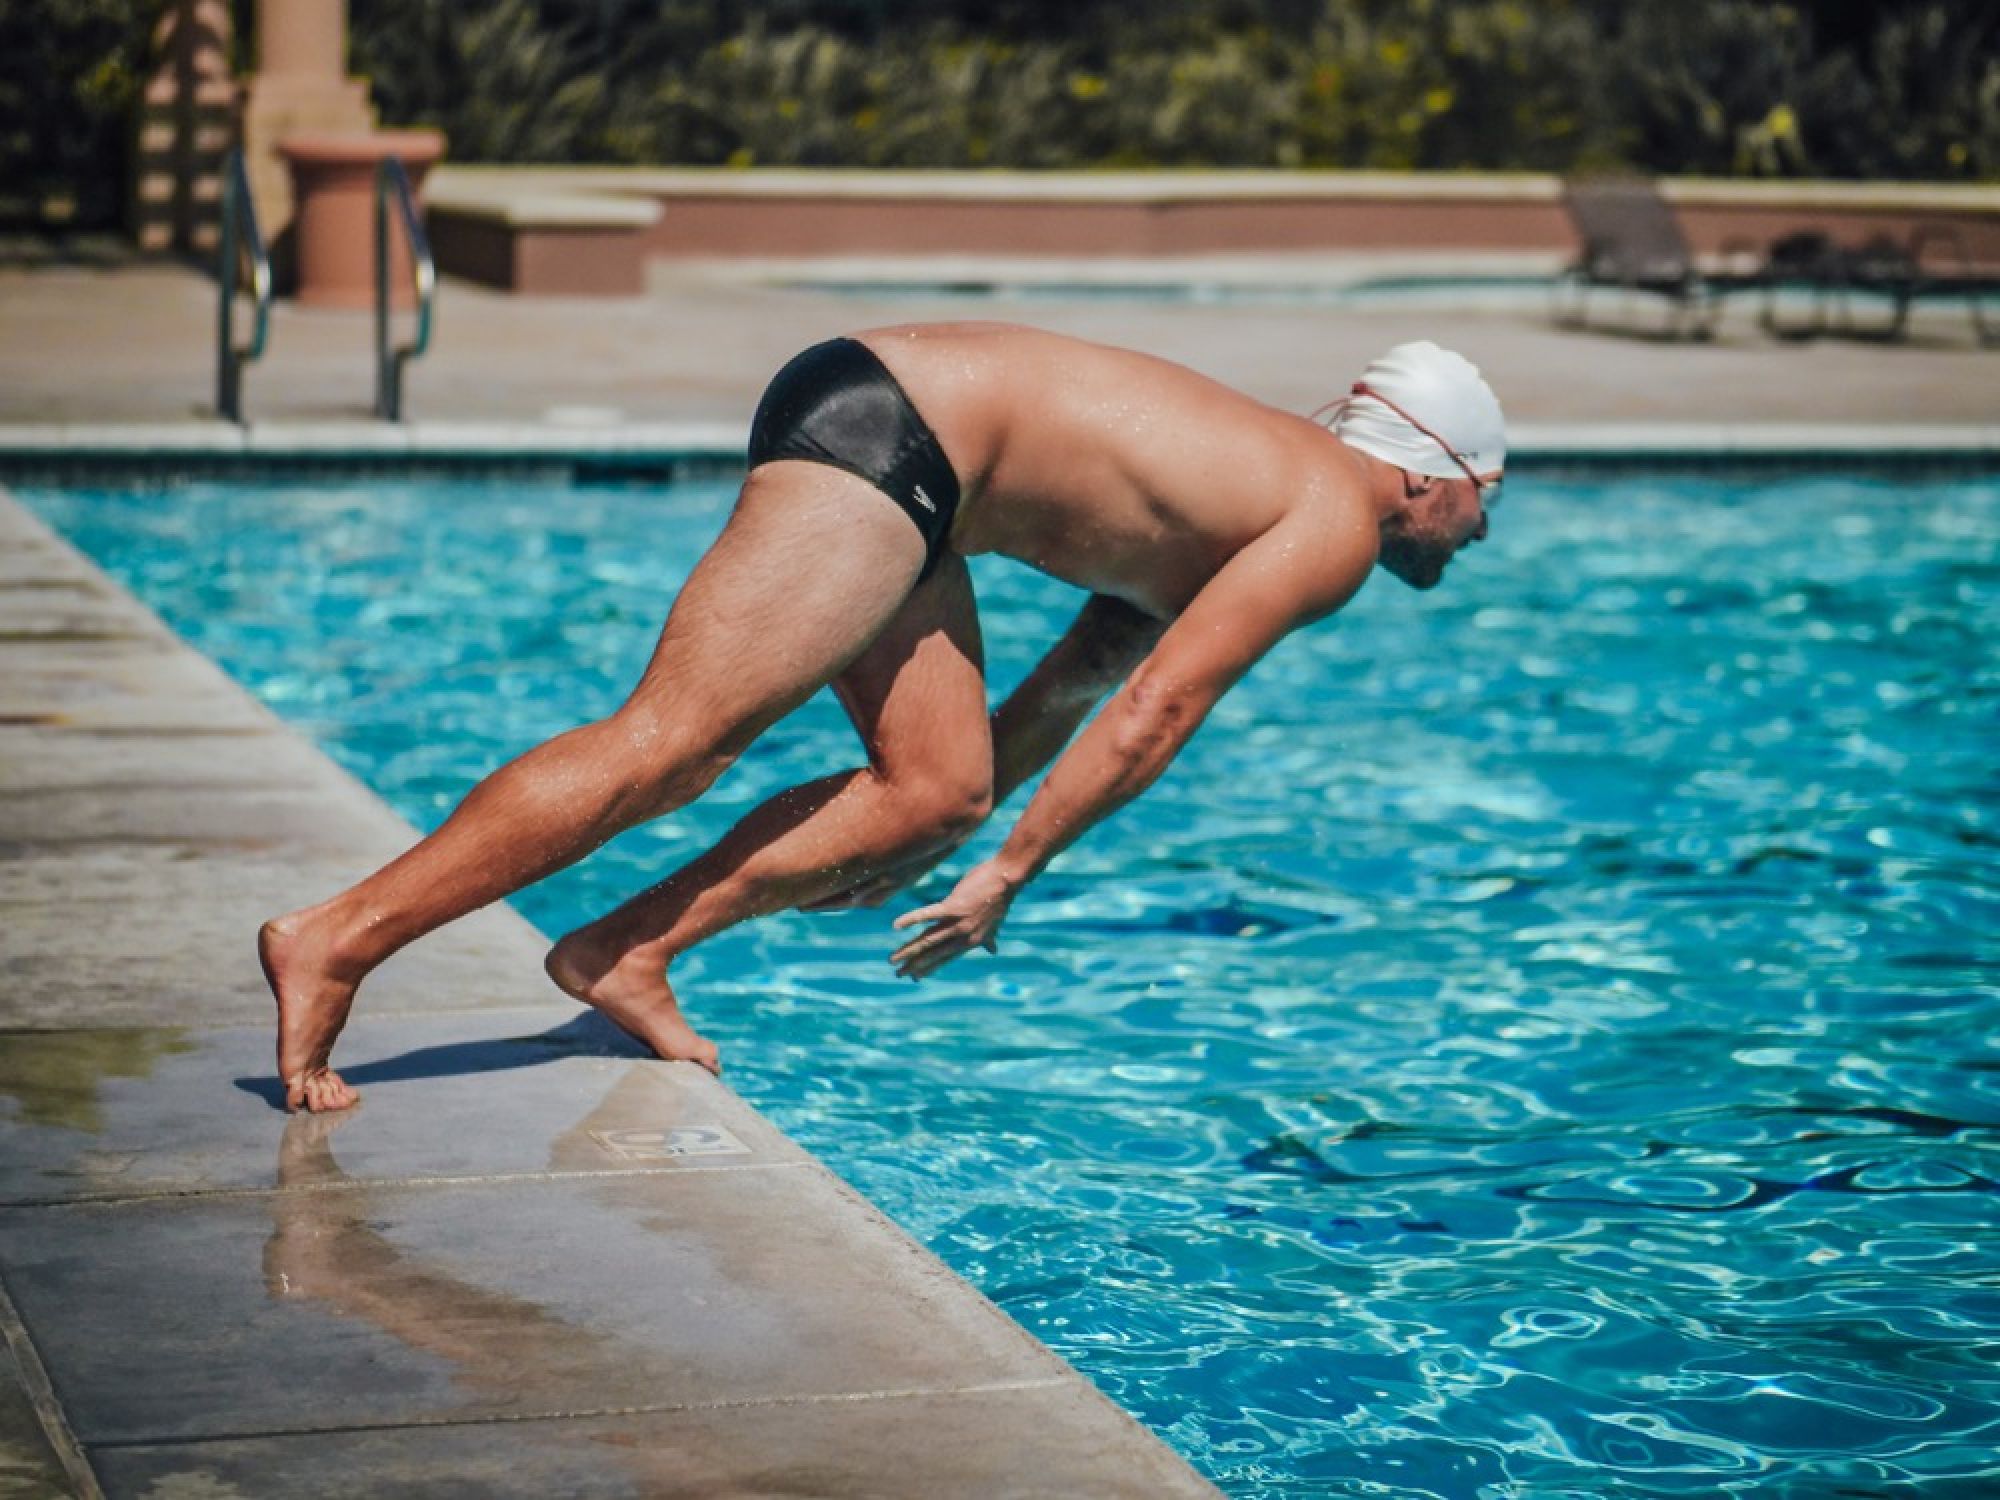 How to become an elite swimmer